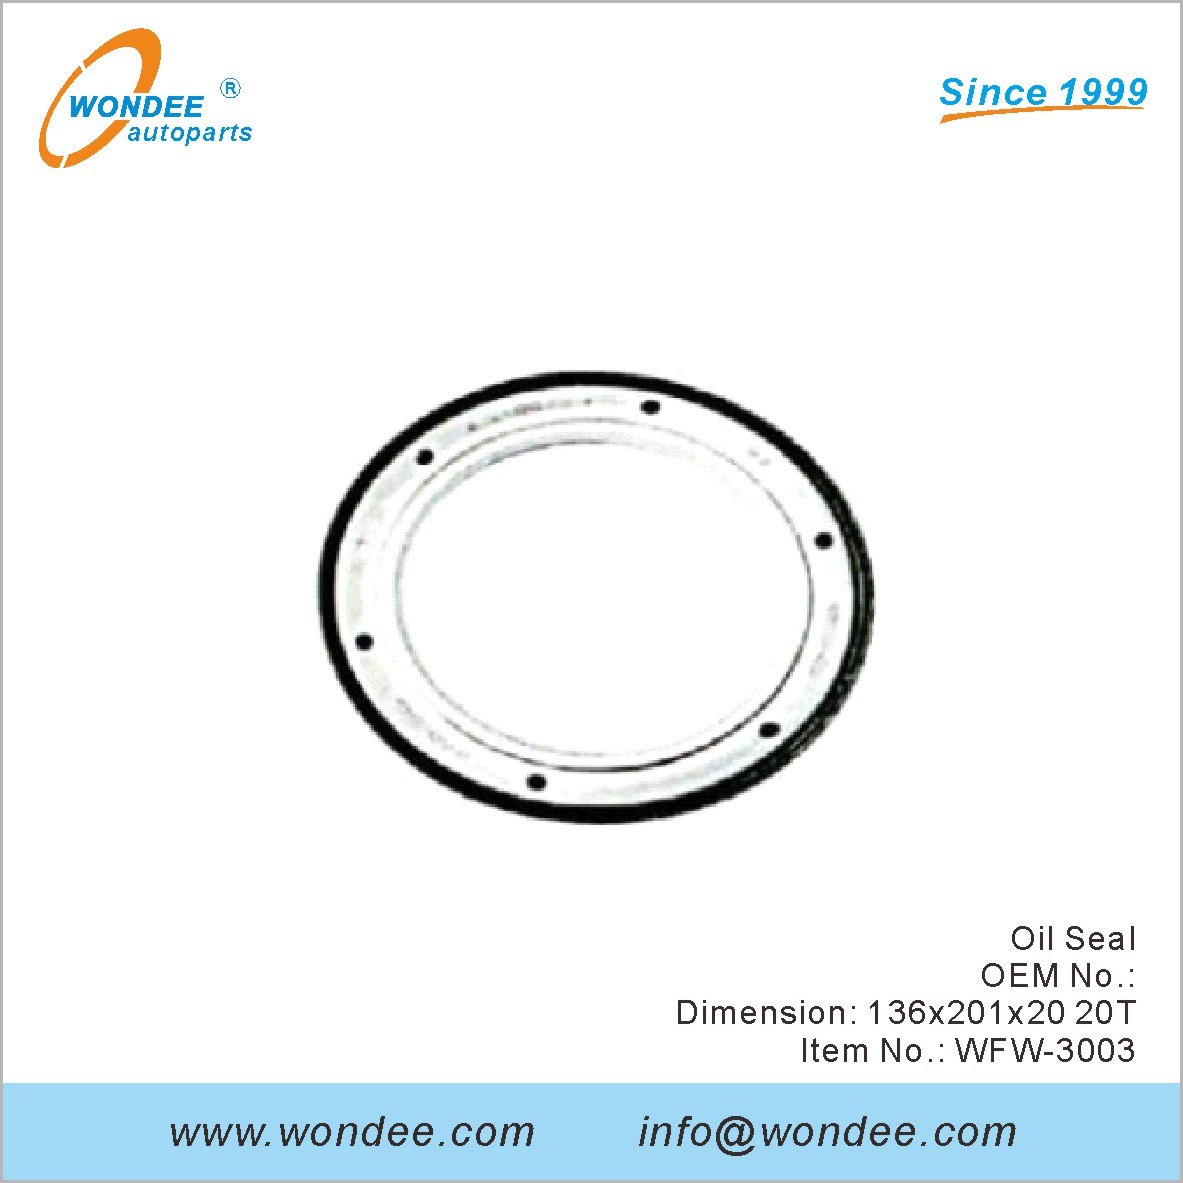 Oil Seal OEM for FUWA from WONDEE (3)